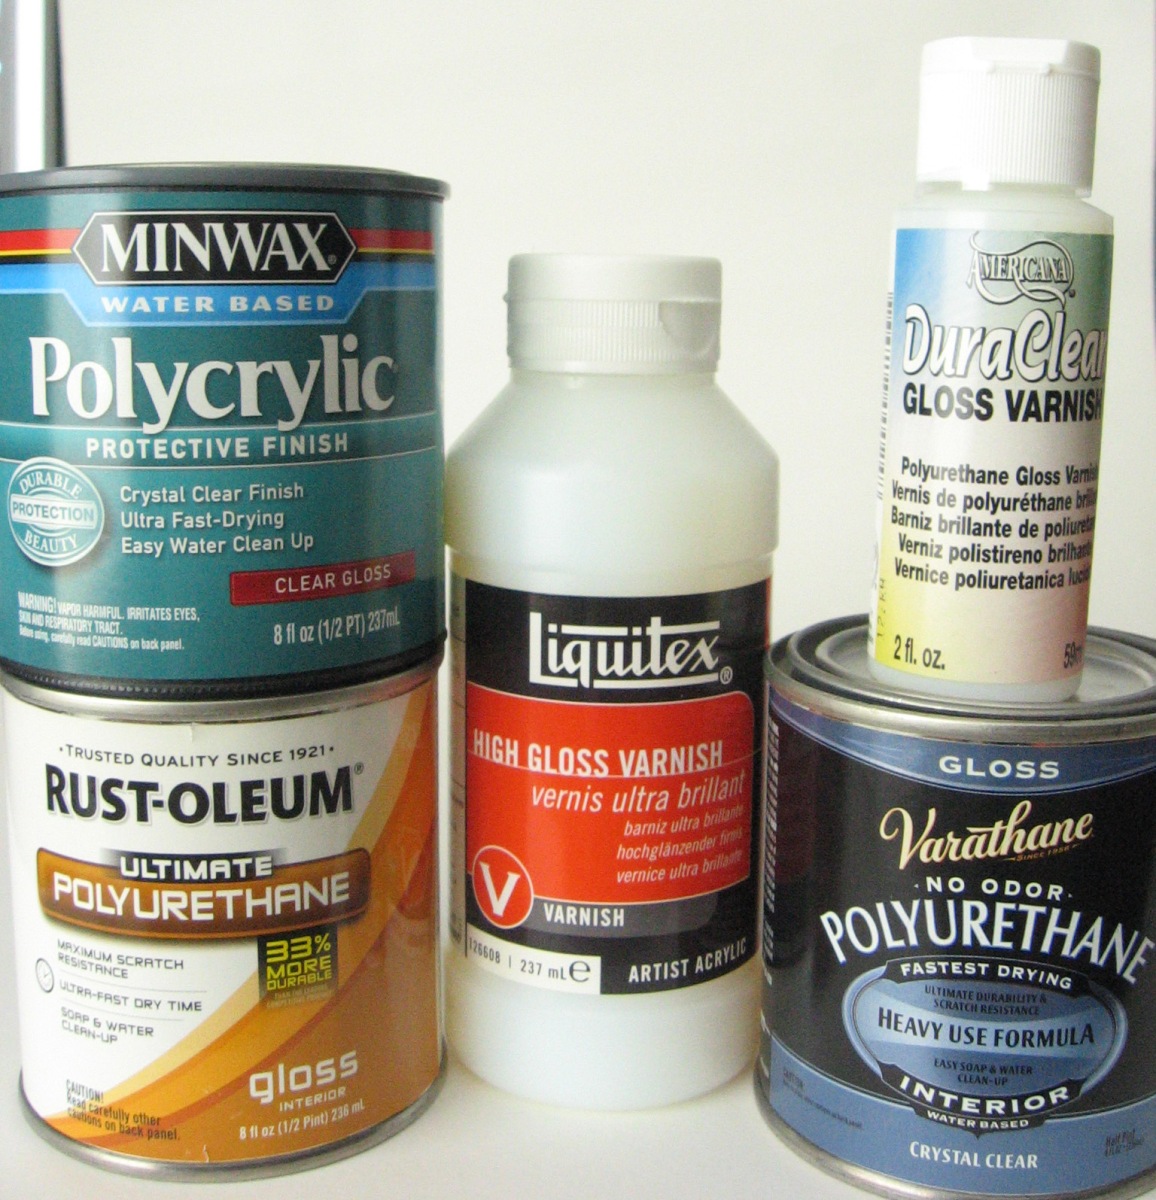 The Best Varnish or Gloss to use on your Polymer Clay or Cold Porcelain  Clay Work